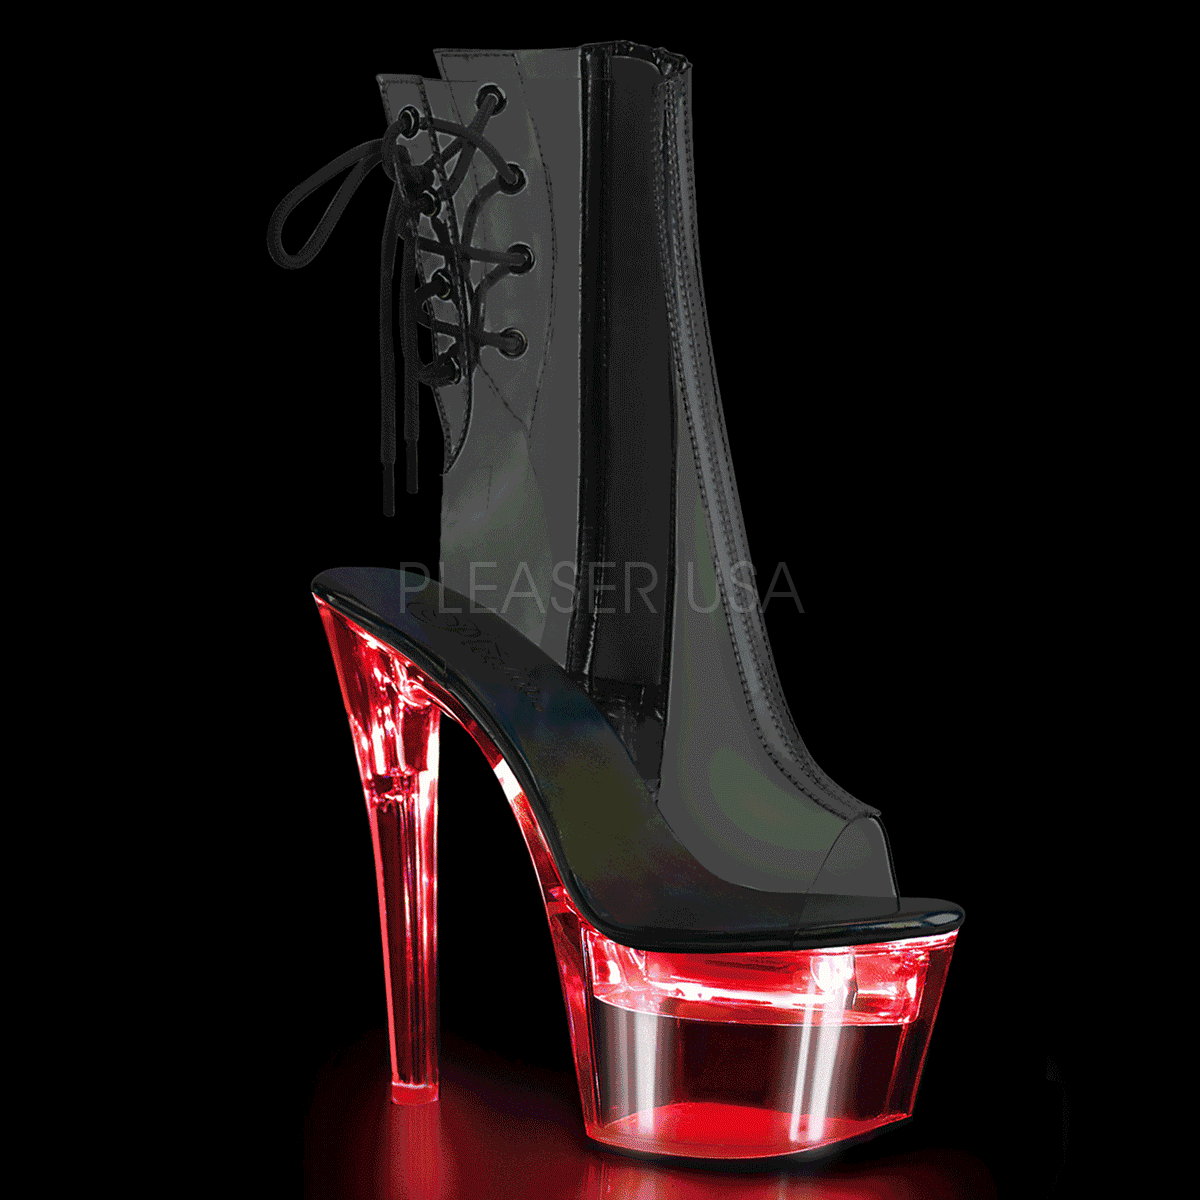 PLEASER Flashdance-1018C-7 Clear Chargeable Multi Colour Light Up Stripper Pole Heels - A Shoe Addiction